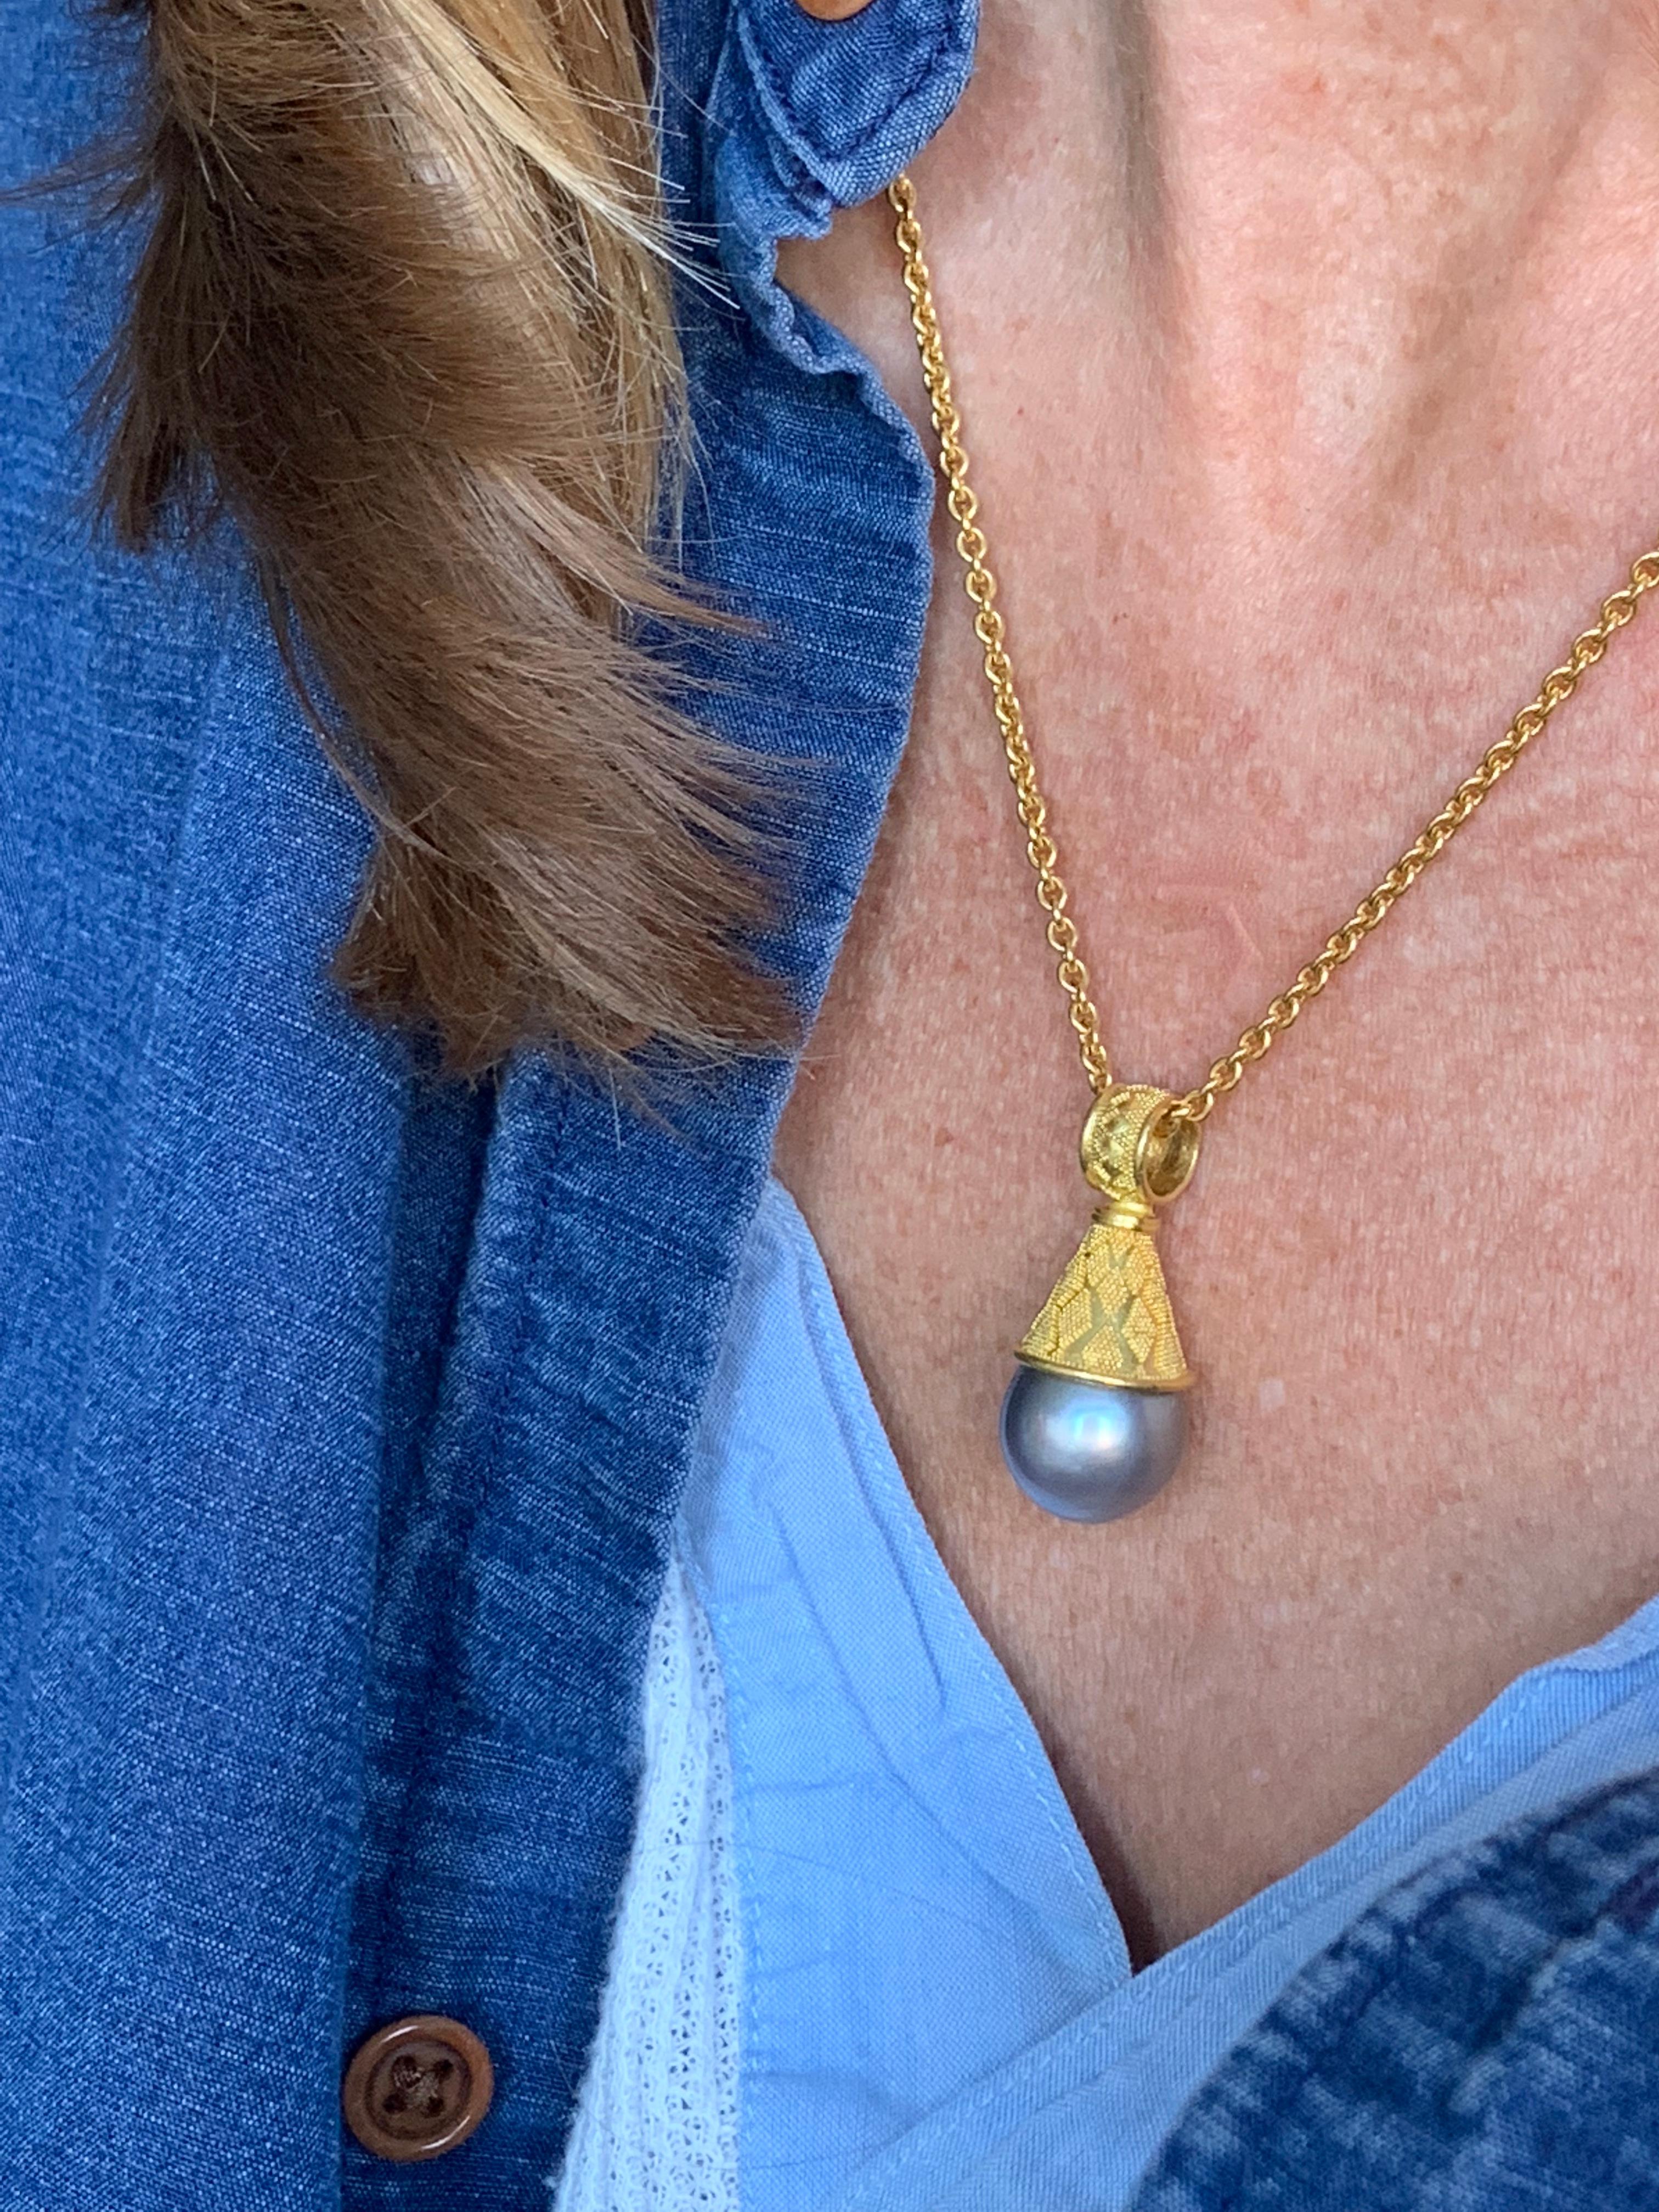 In the manner of Etruscan jewelry, this Tahitian grey pearl pendant is meticulously ornamented with delicate granulation in 22 karat gold and set in a cone cap and bail. Appearing both soft and metallic, grey pearls are the perfect blend of modern